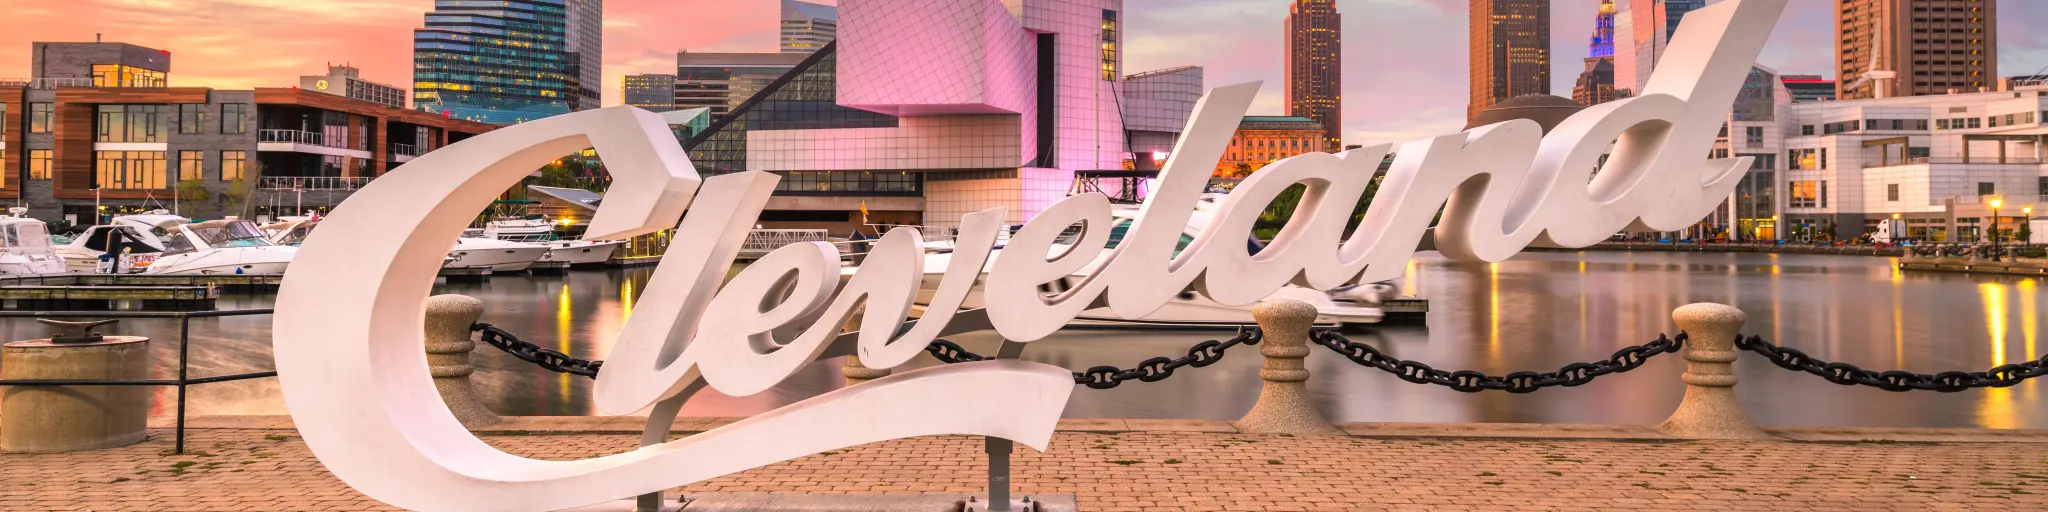 Skyline of downtown Cleveland from Voinovich Bicentennial Park during a sunset, the famous "Cleveland" sign is in focus